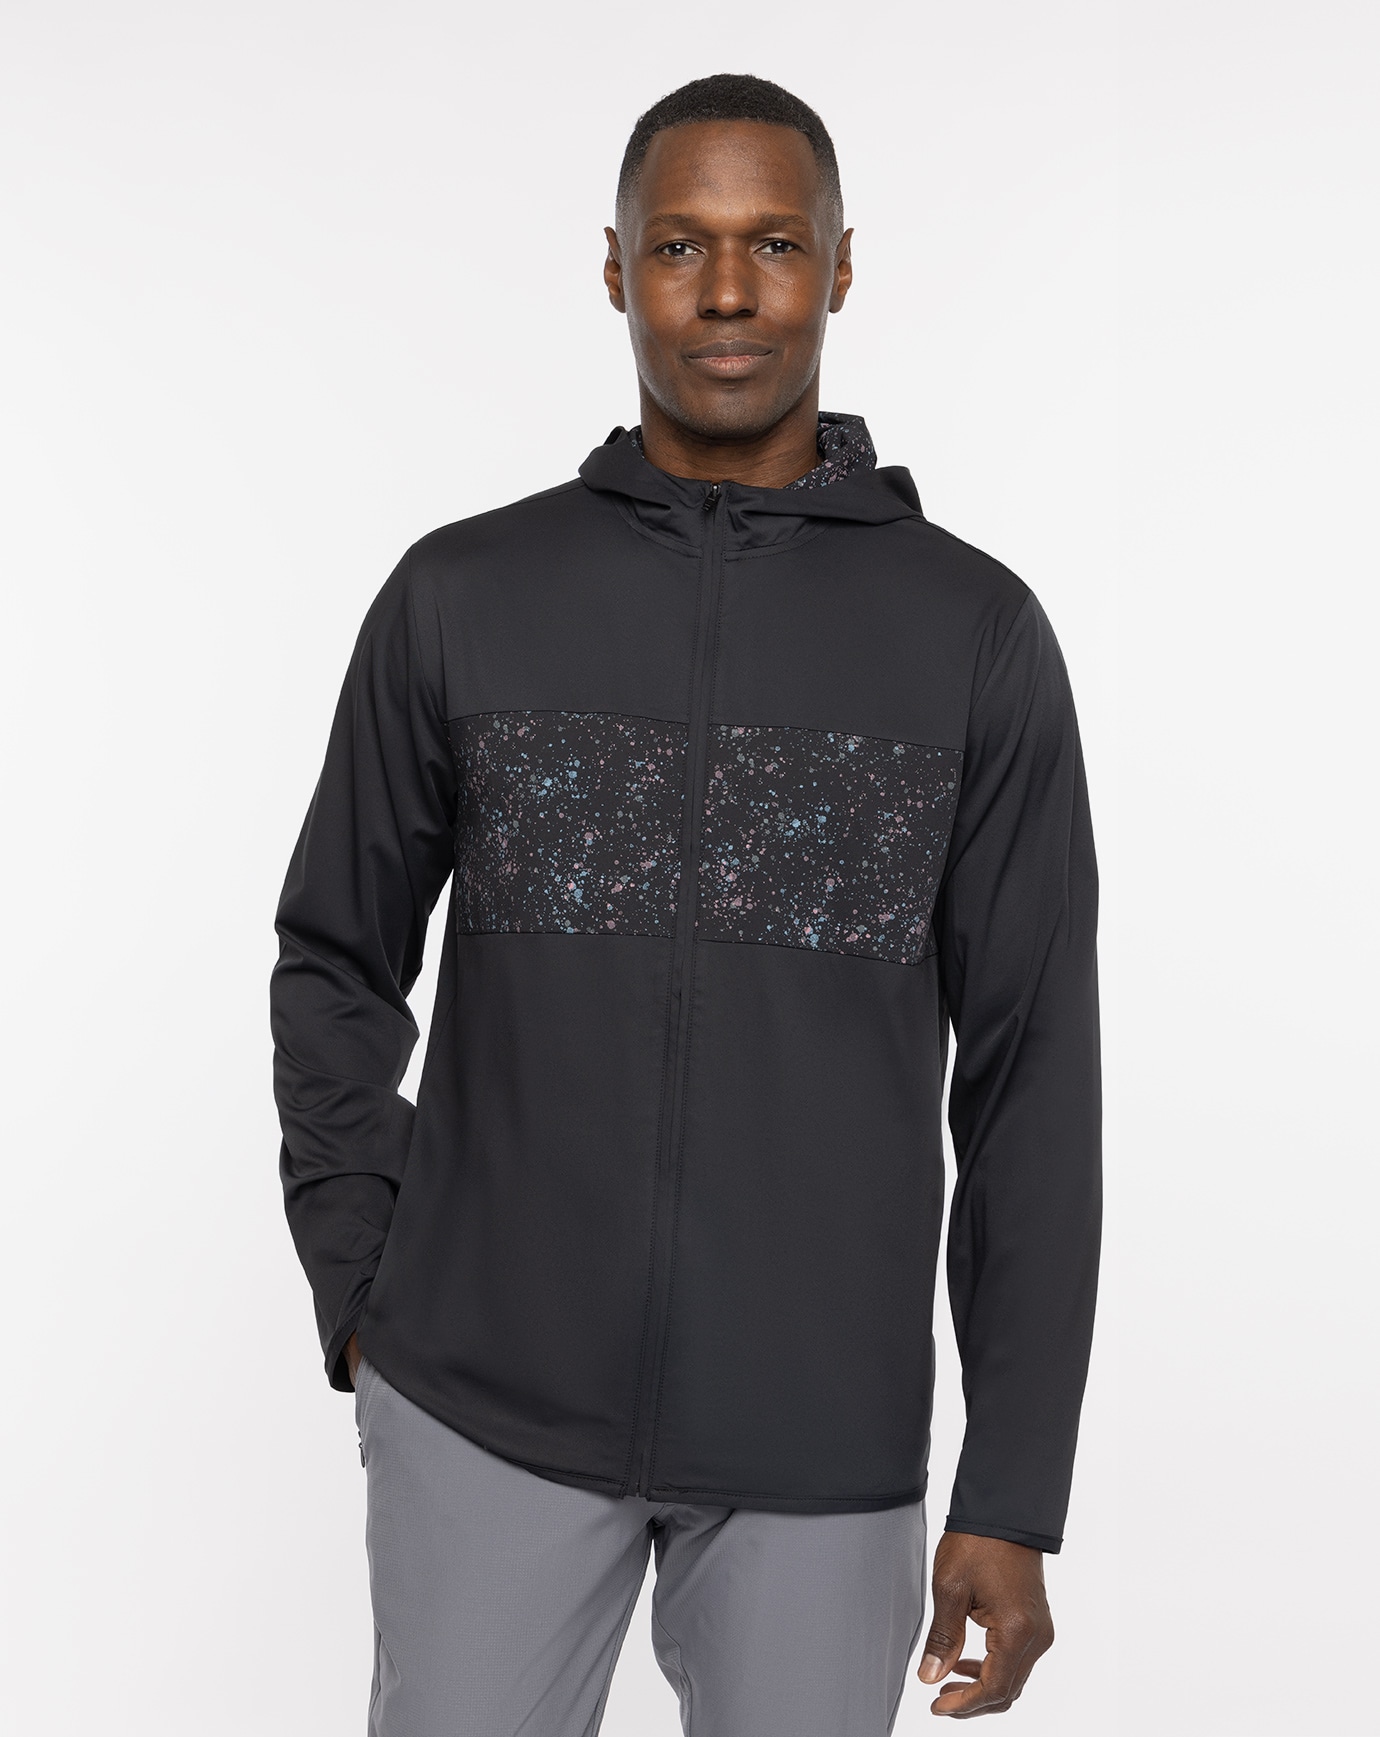 Related Product - SPLATTER TECH HOODIE